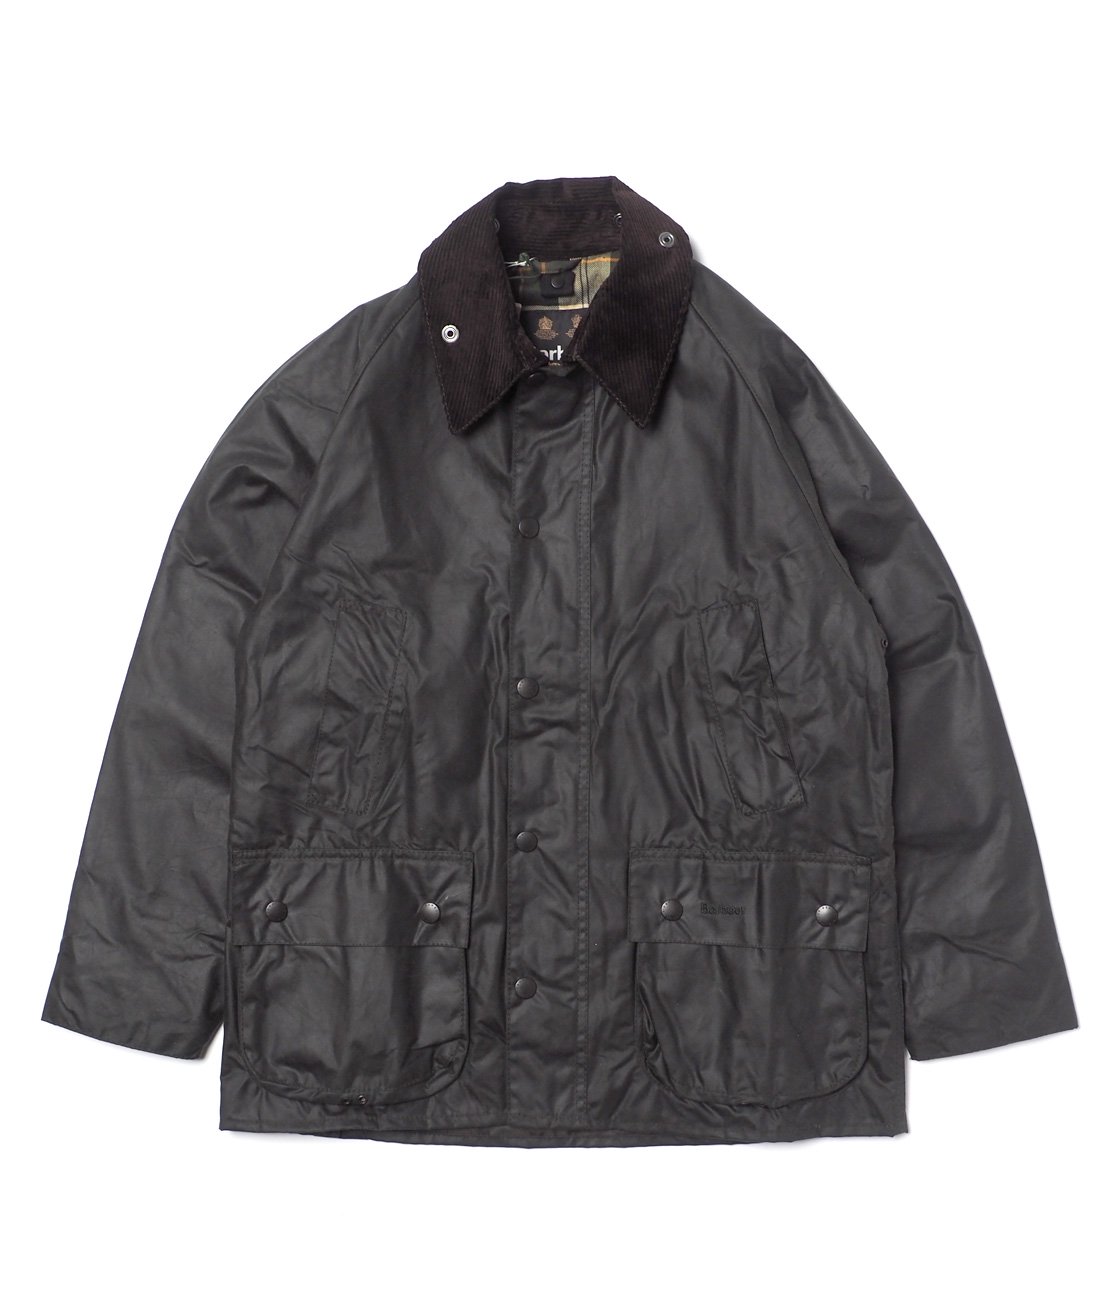 BARBOUR】MWX0018 CLASSIC BEDALE - SAGE ビデイル ジャケット